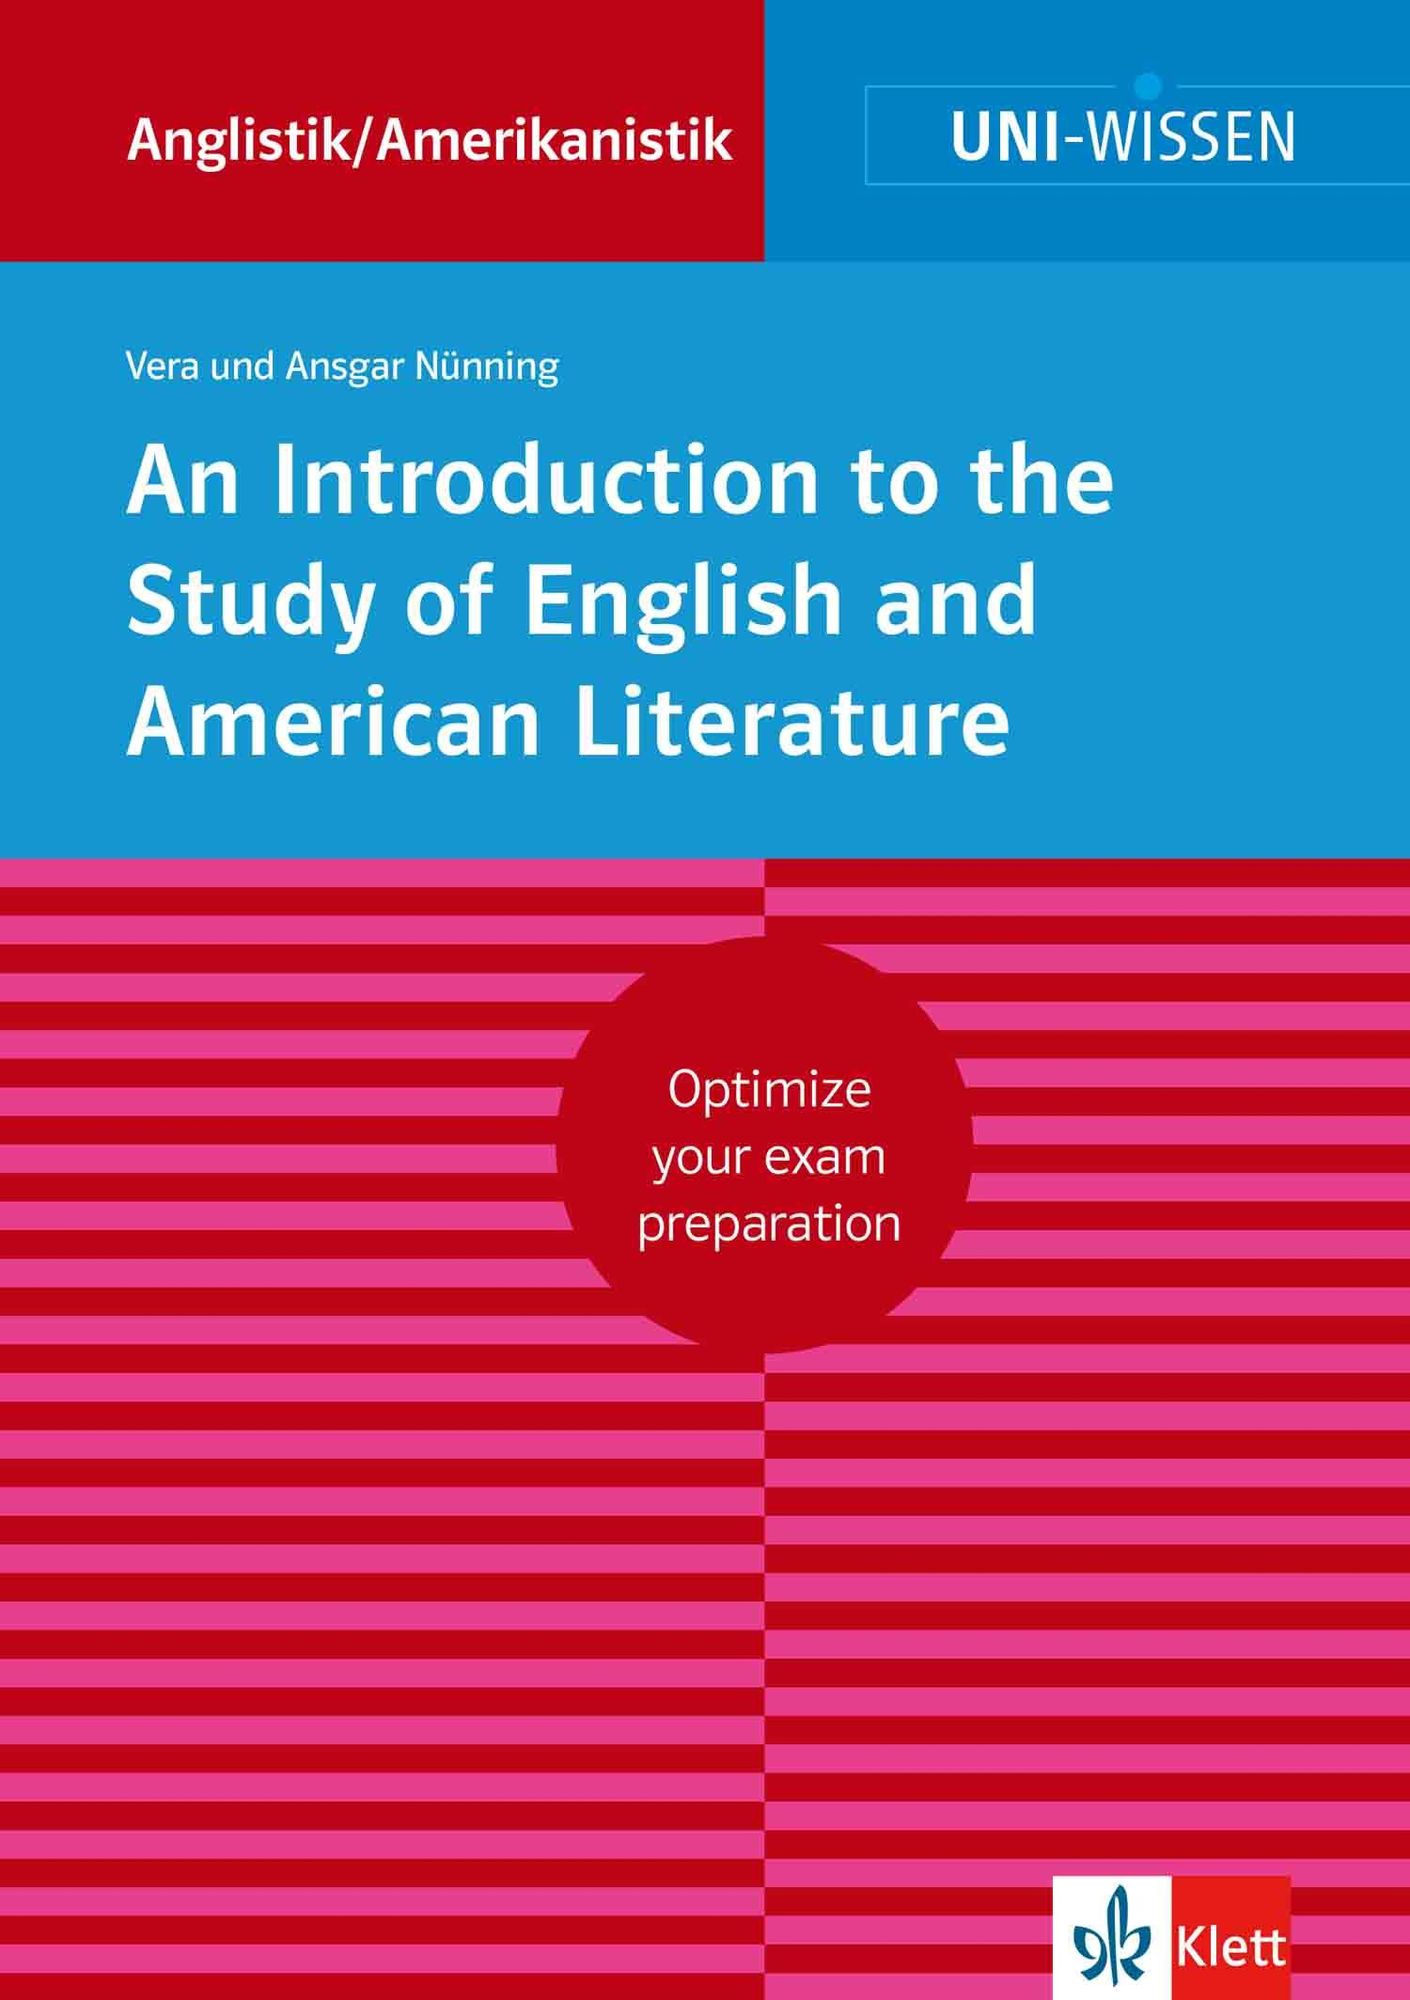 Introduction　Nünning'　English　to　eBook　von　Uni-Wissen　An　Version)'　Literature　of　American　the　and　English　Study　'Vera